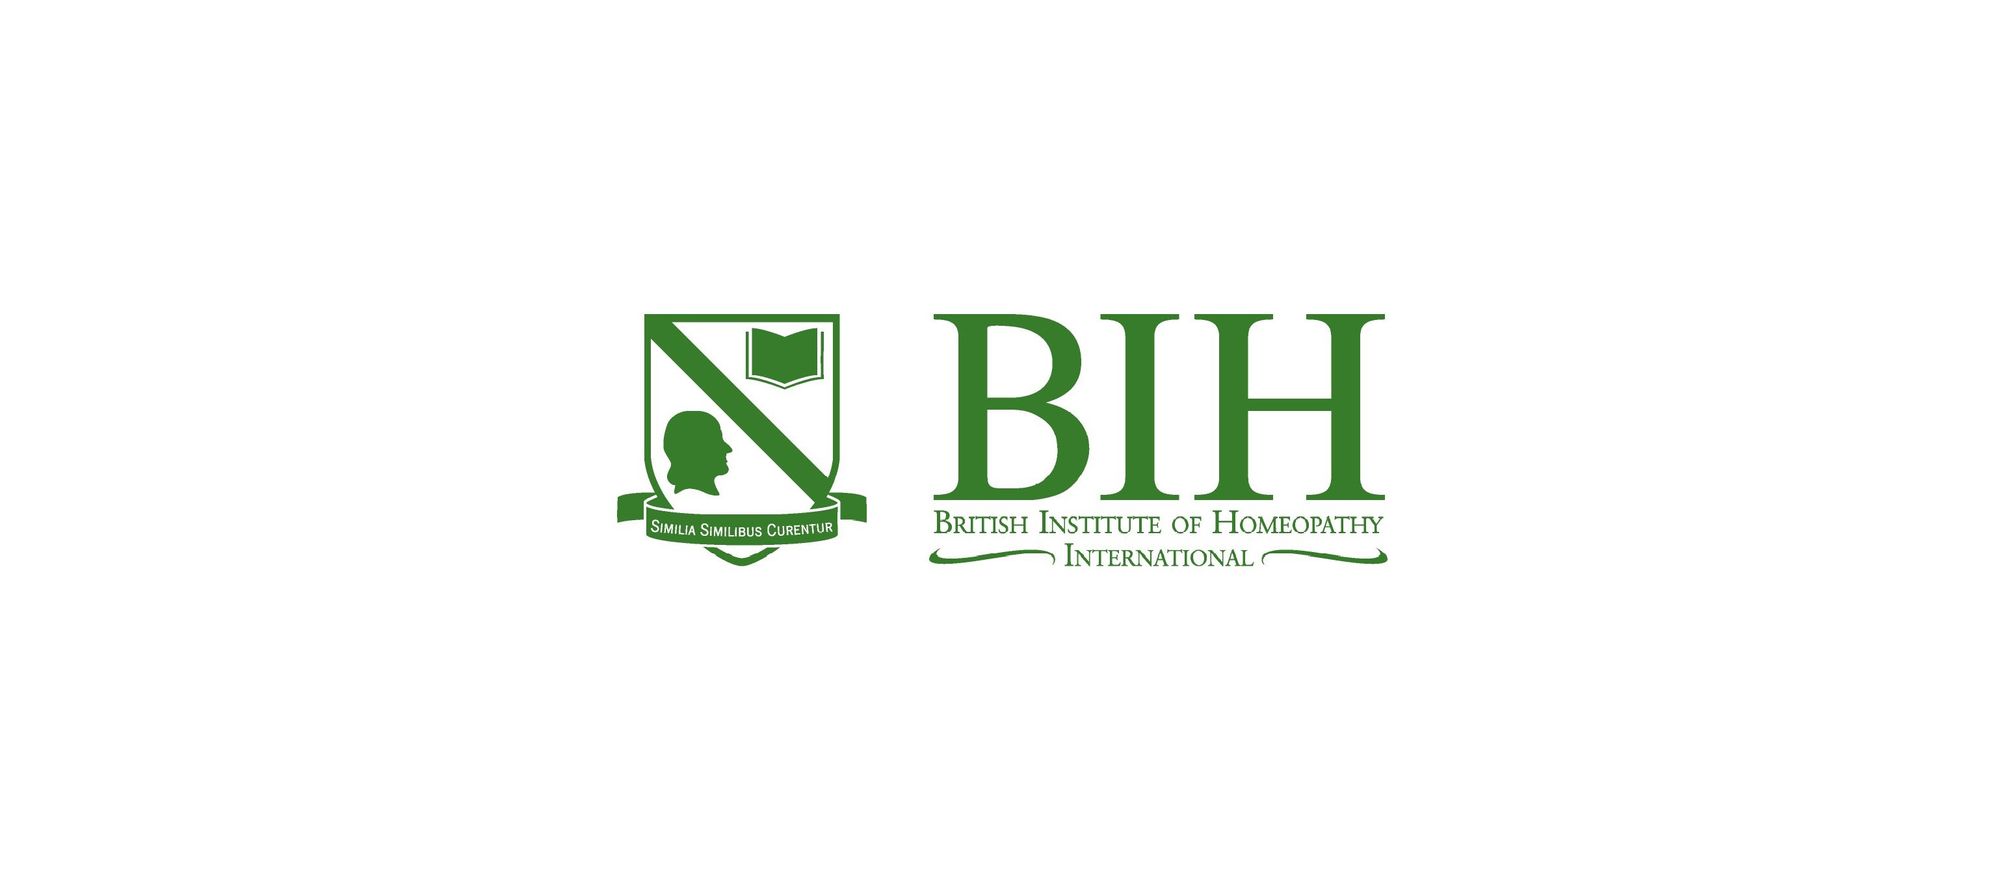 The British Institute of Homeopathy - Maria Bohle